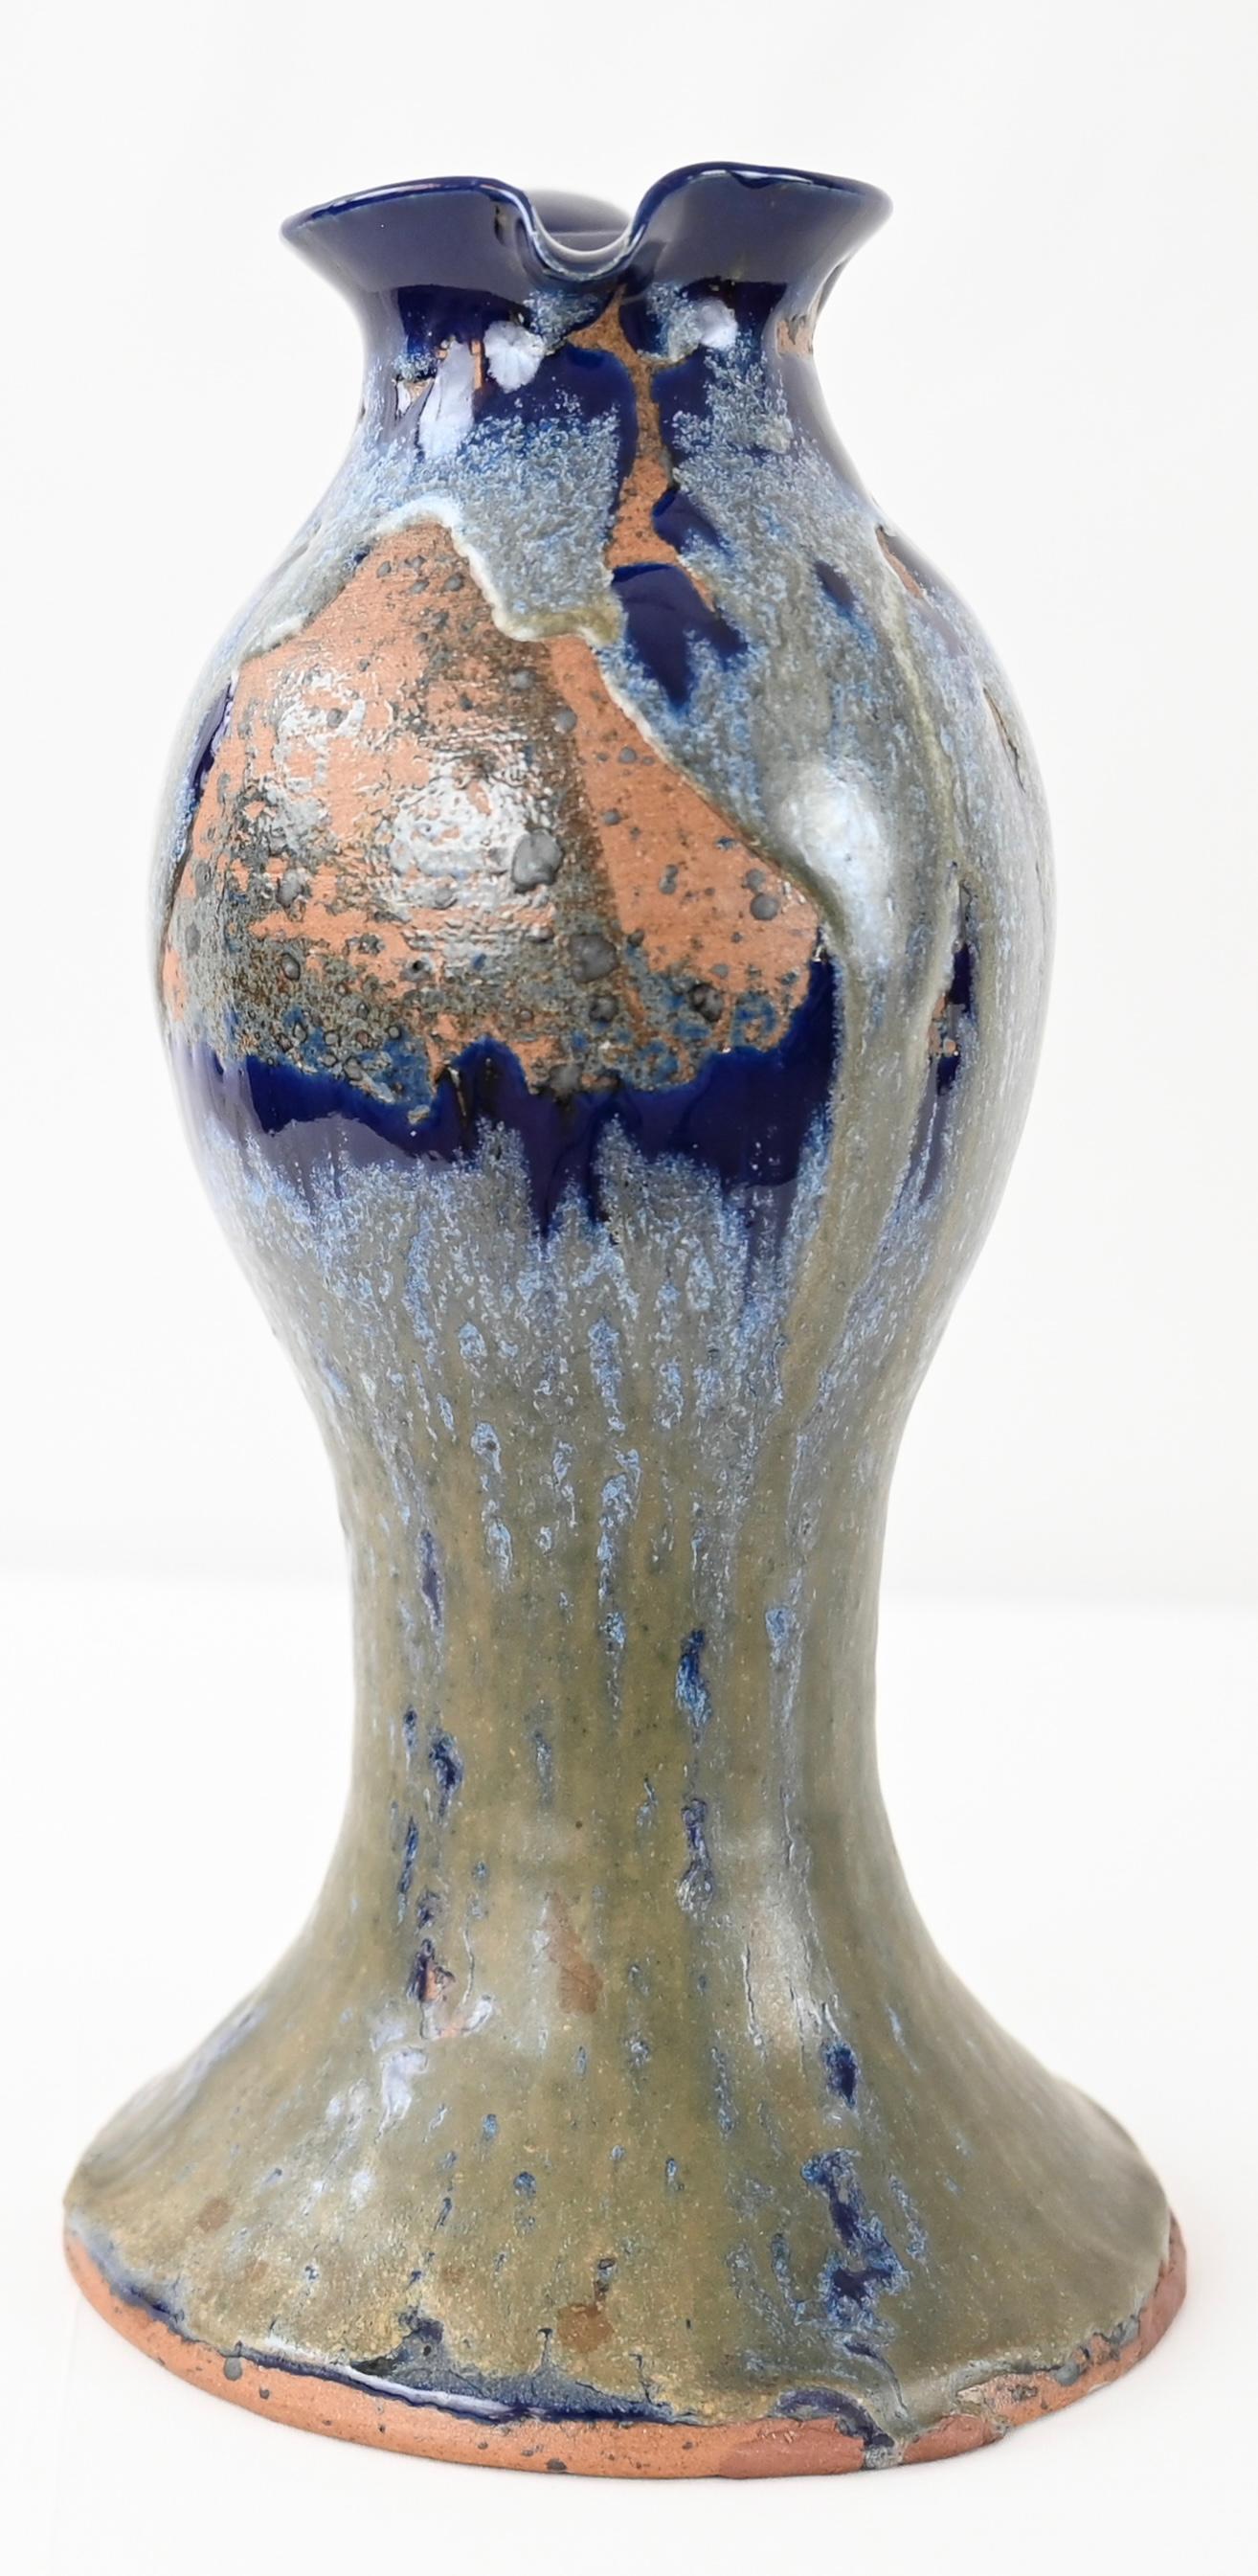 Gorgeously glazed in blue, gray, white and coral hues, this vase in pitcher form has a classic, French Art Nouveau silhouette. This piece was hand-crafted in France using traditional pottery making techniques. Attributed to Charles Greber. Signed.